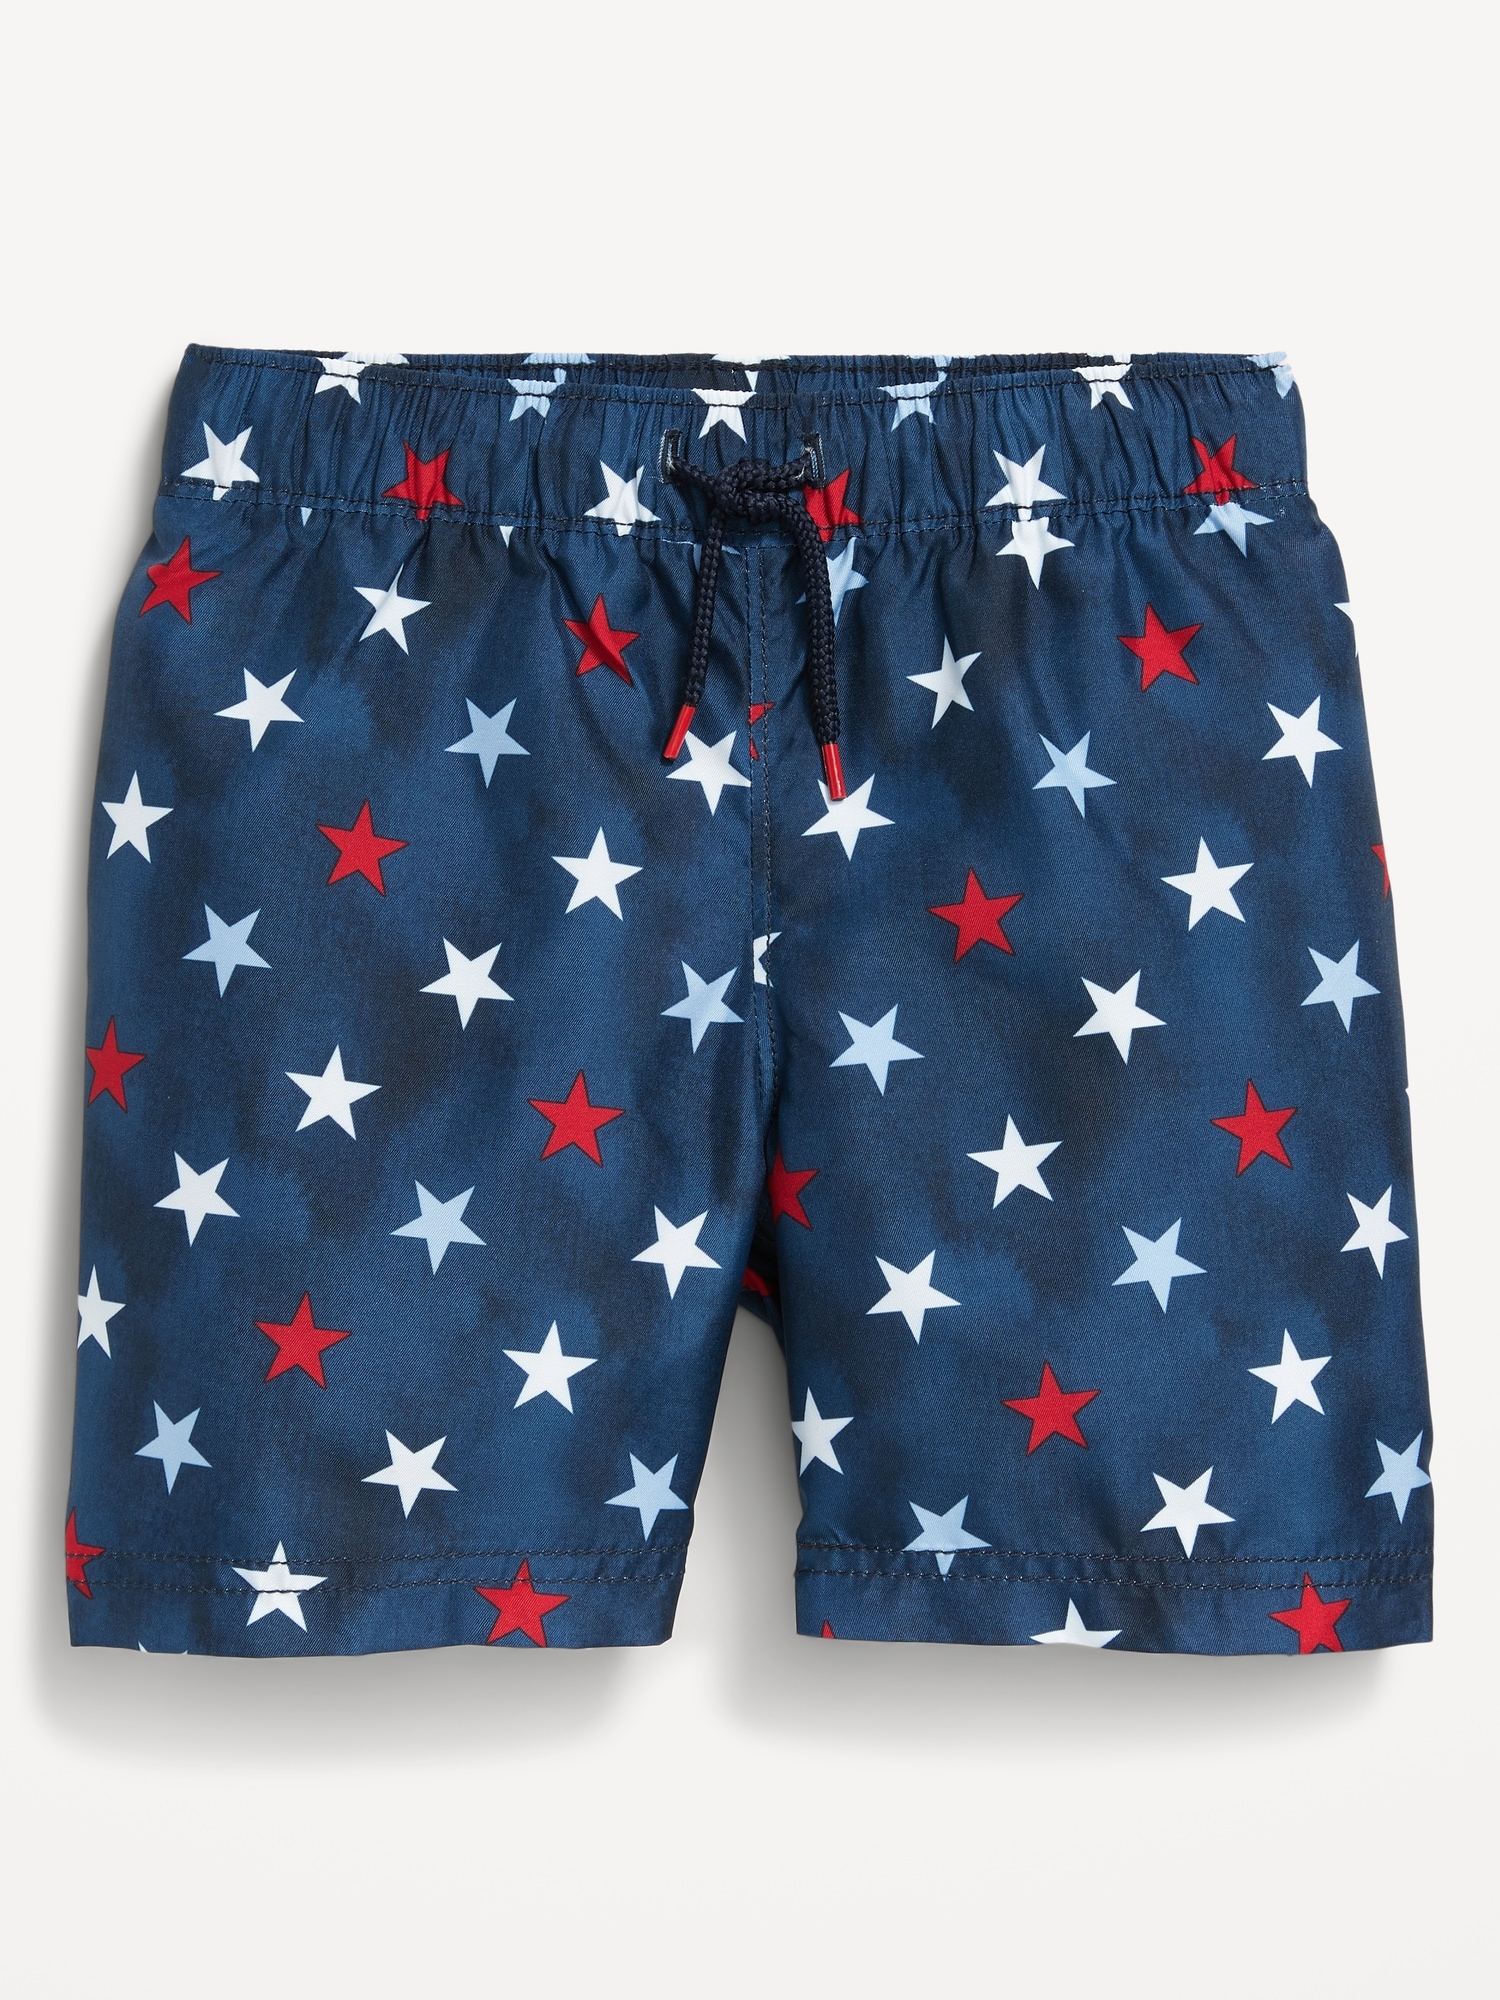 Old Navy Matching Printed Swim Trunks for Toddler Boys blue. 1